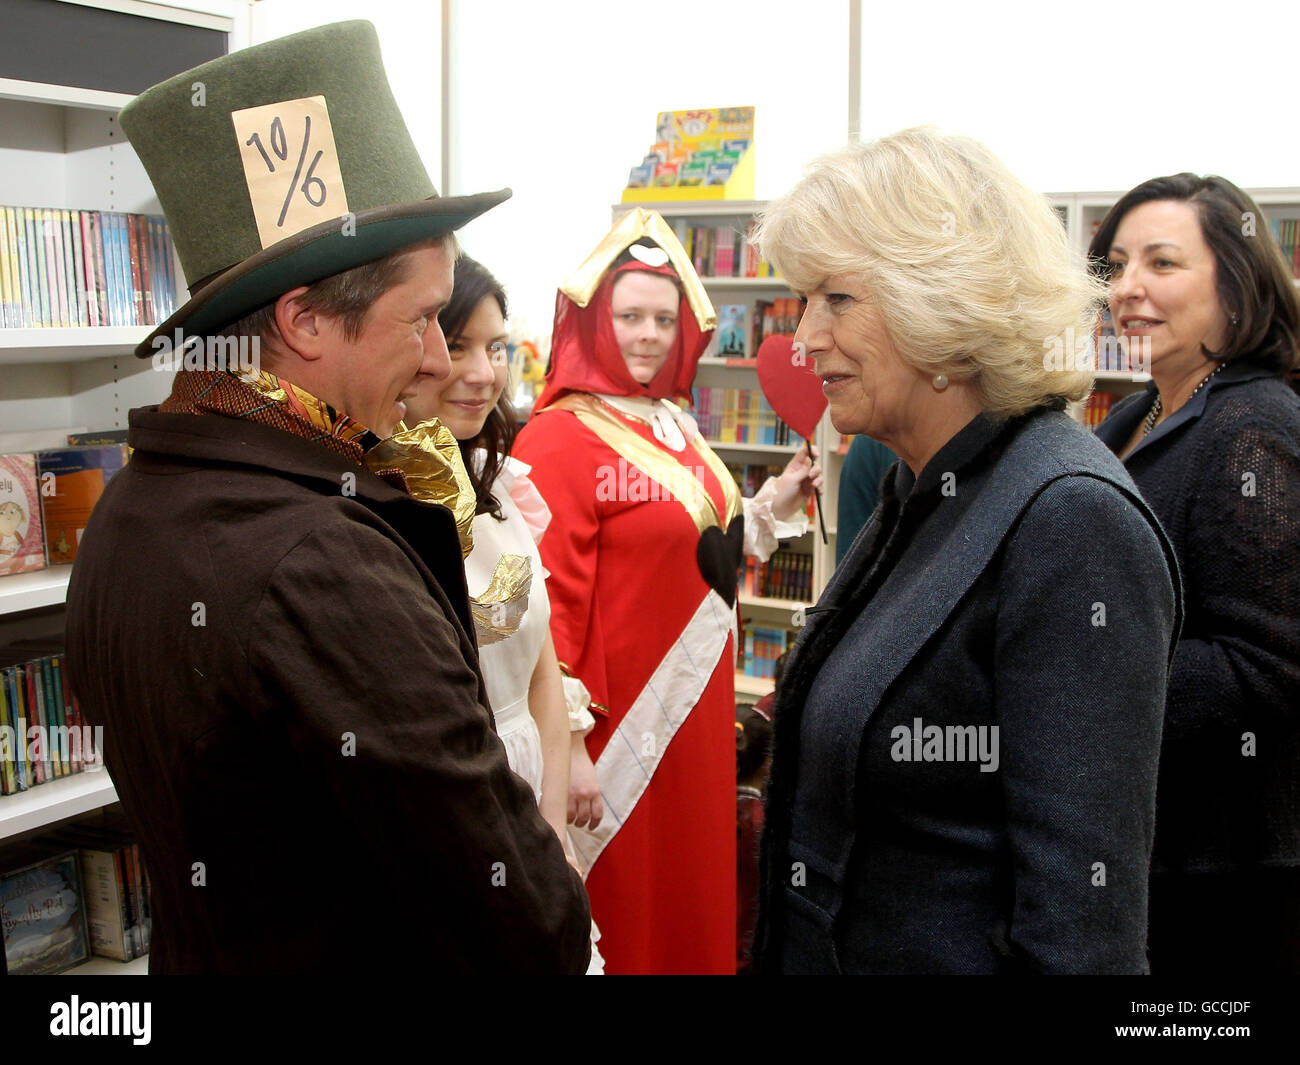 The Duchess of Cornwall meets Katherine Kingsford (Queen of Hearts), Tom Walker (Mad Hatter) and Marieke Van Hoof (Alice) during a visit to a Mad Hatter's Tea Party at Foyles, Westfield in London, to mark World Book Day Stock Photo